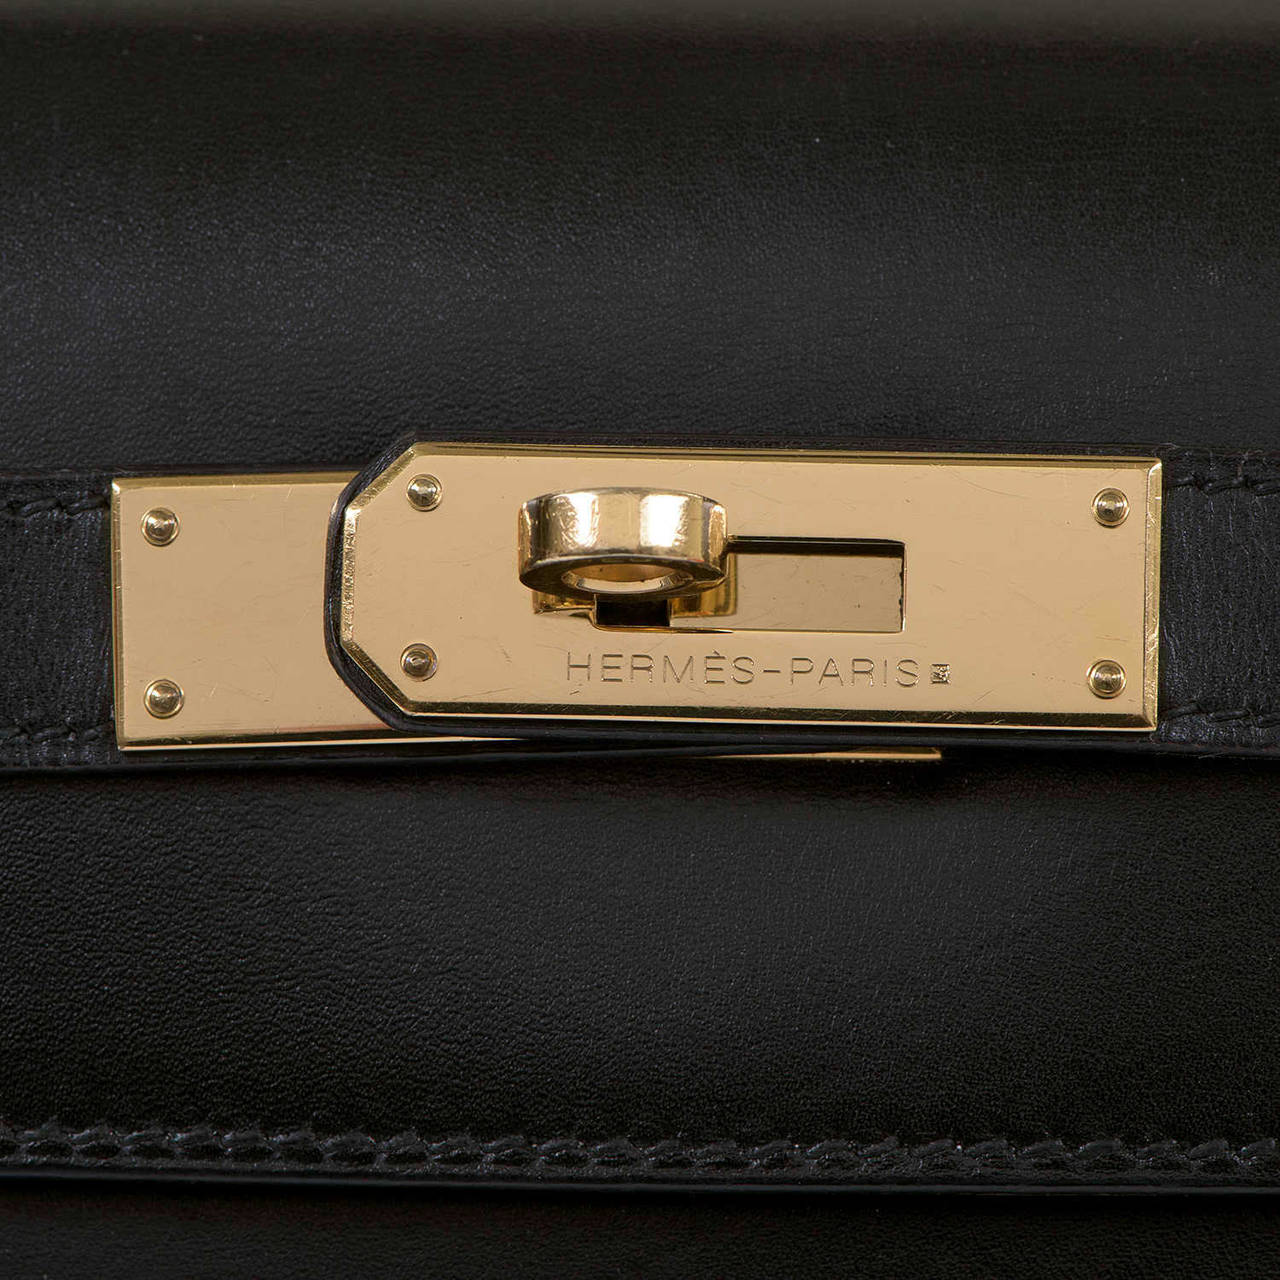 PRISTINE Hermes Kelly 33cm 'Sellier' Bag in Black Box Leather with Gold Hardware 2